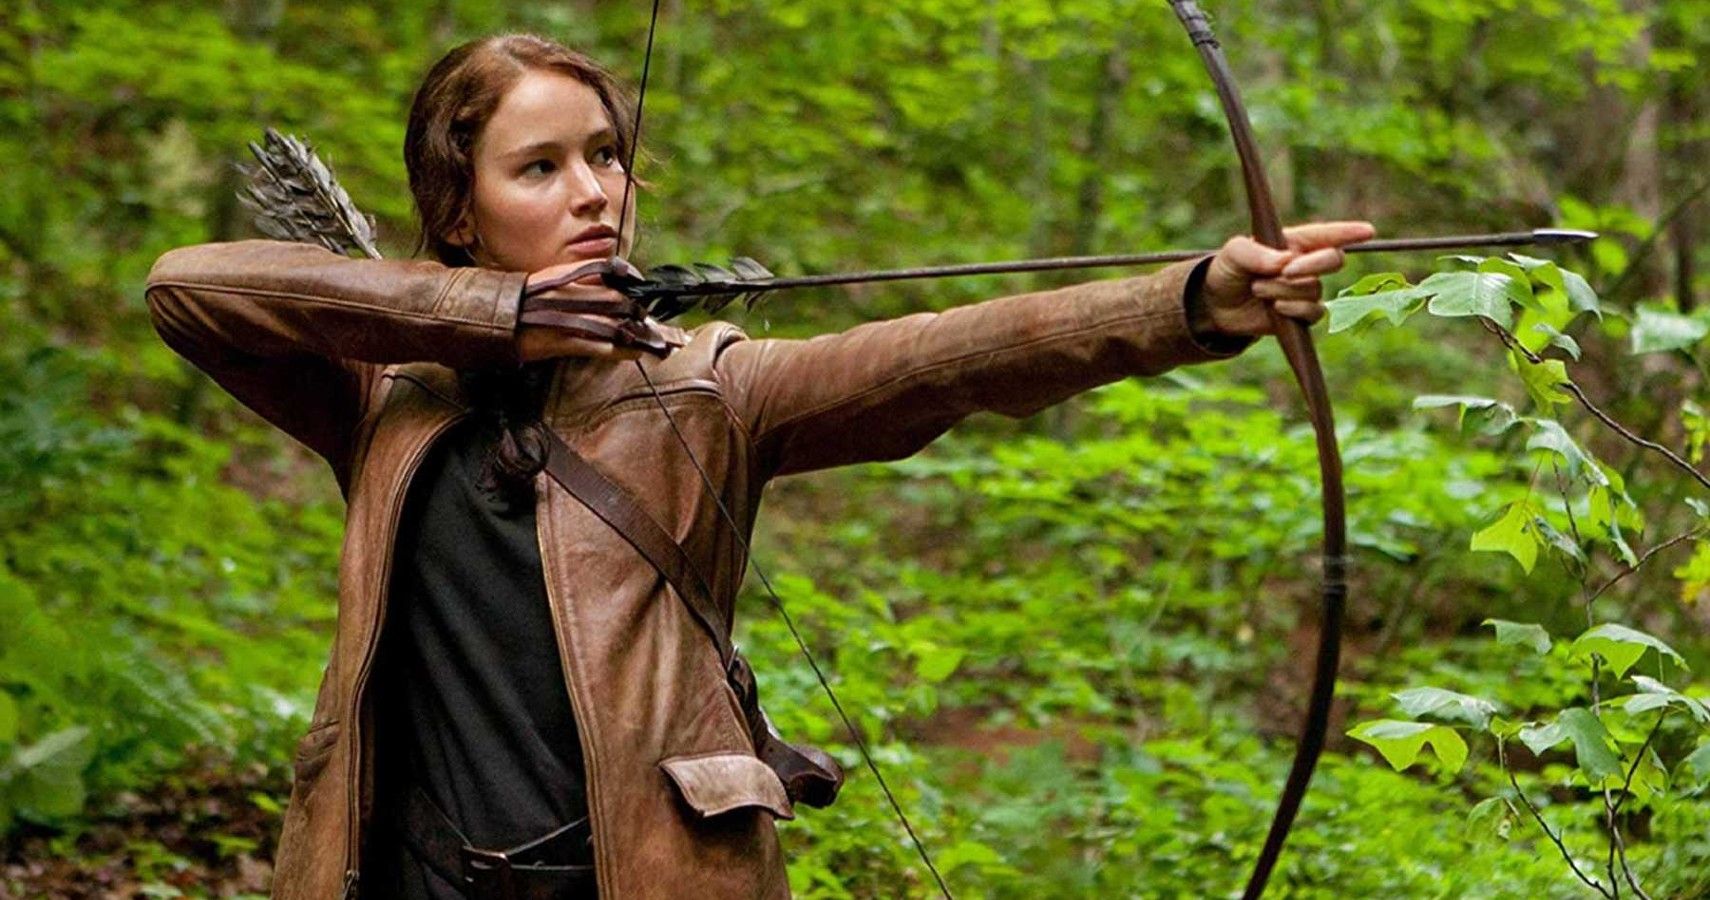 Jennifer Lawrence Her 5 Best & 5 Worst Roles (According To IMDb)